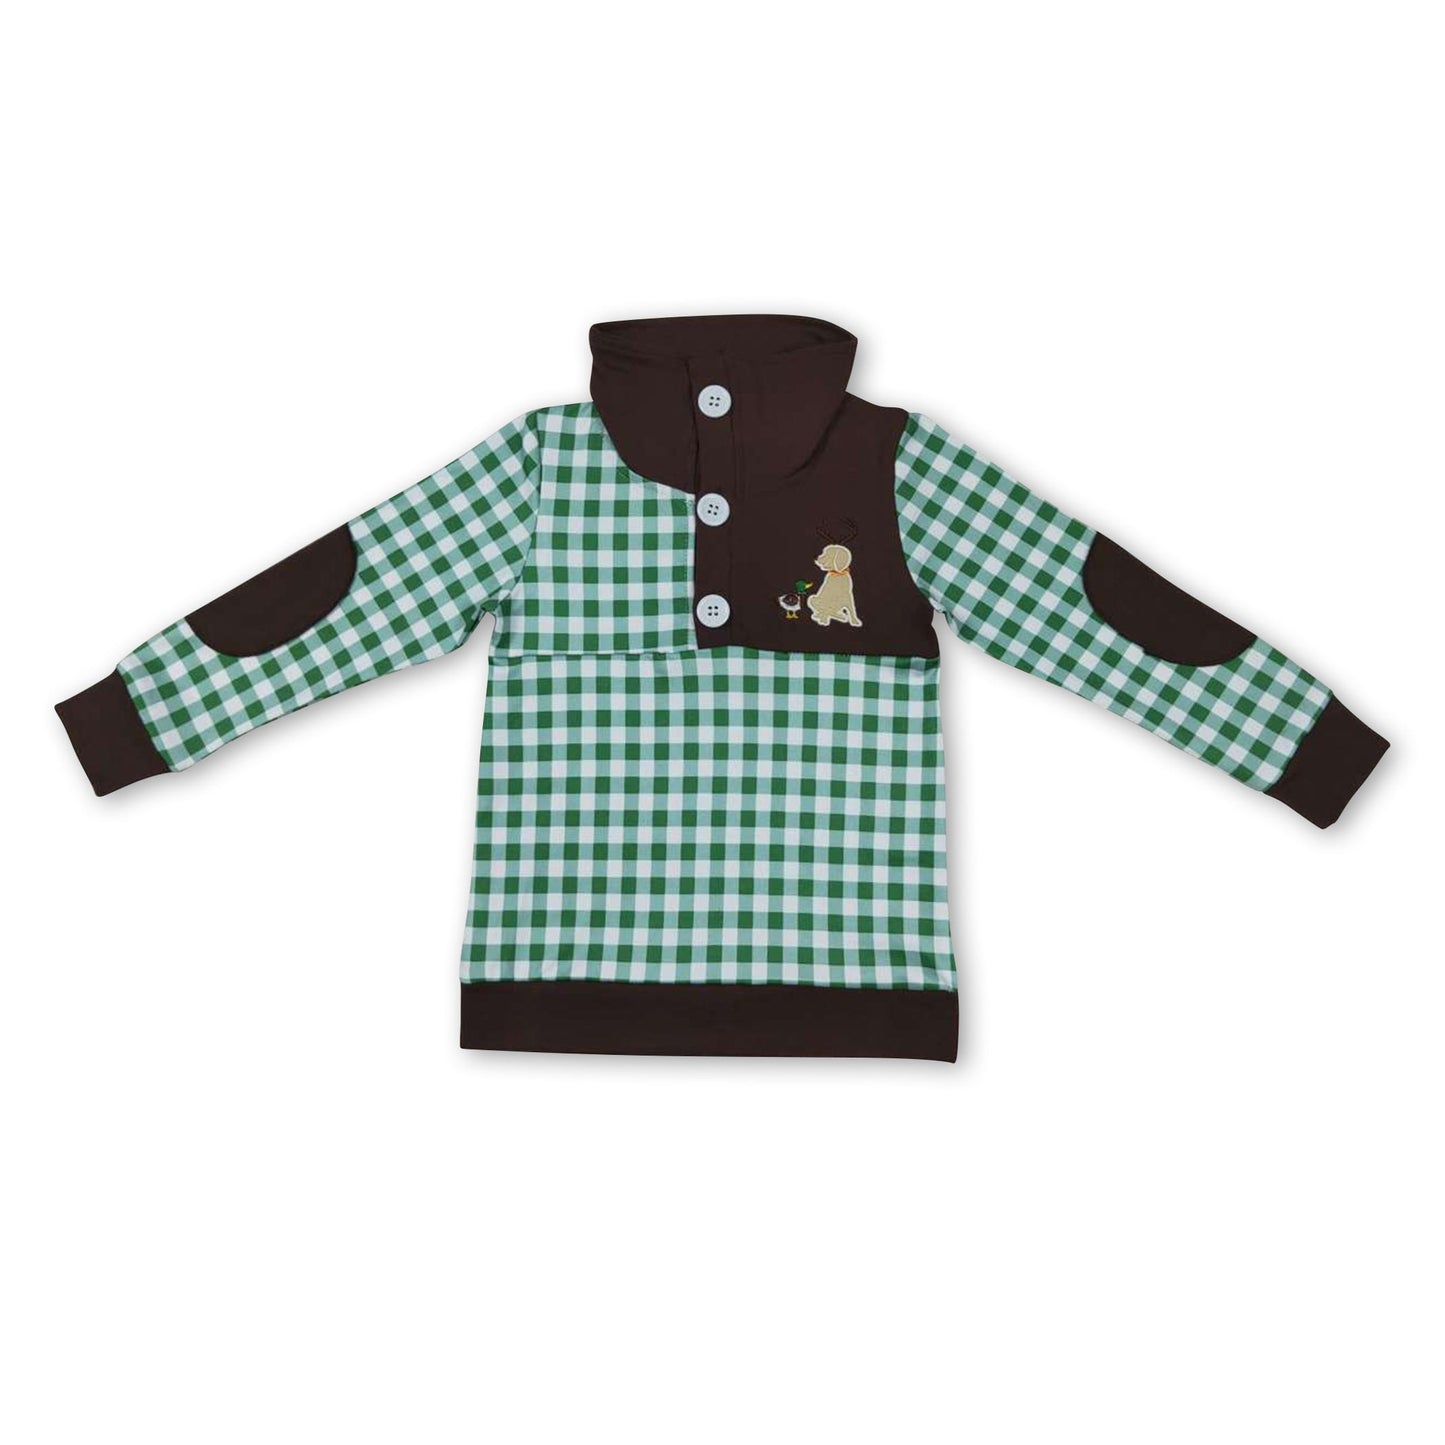 Green plaid duck dogs kids boy pullover